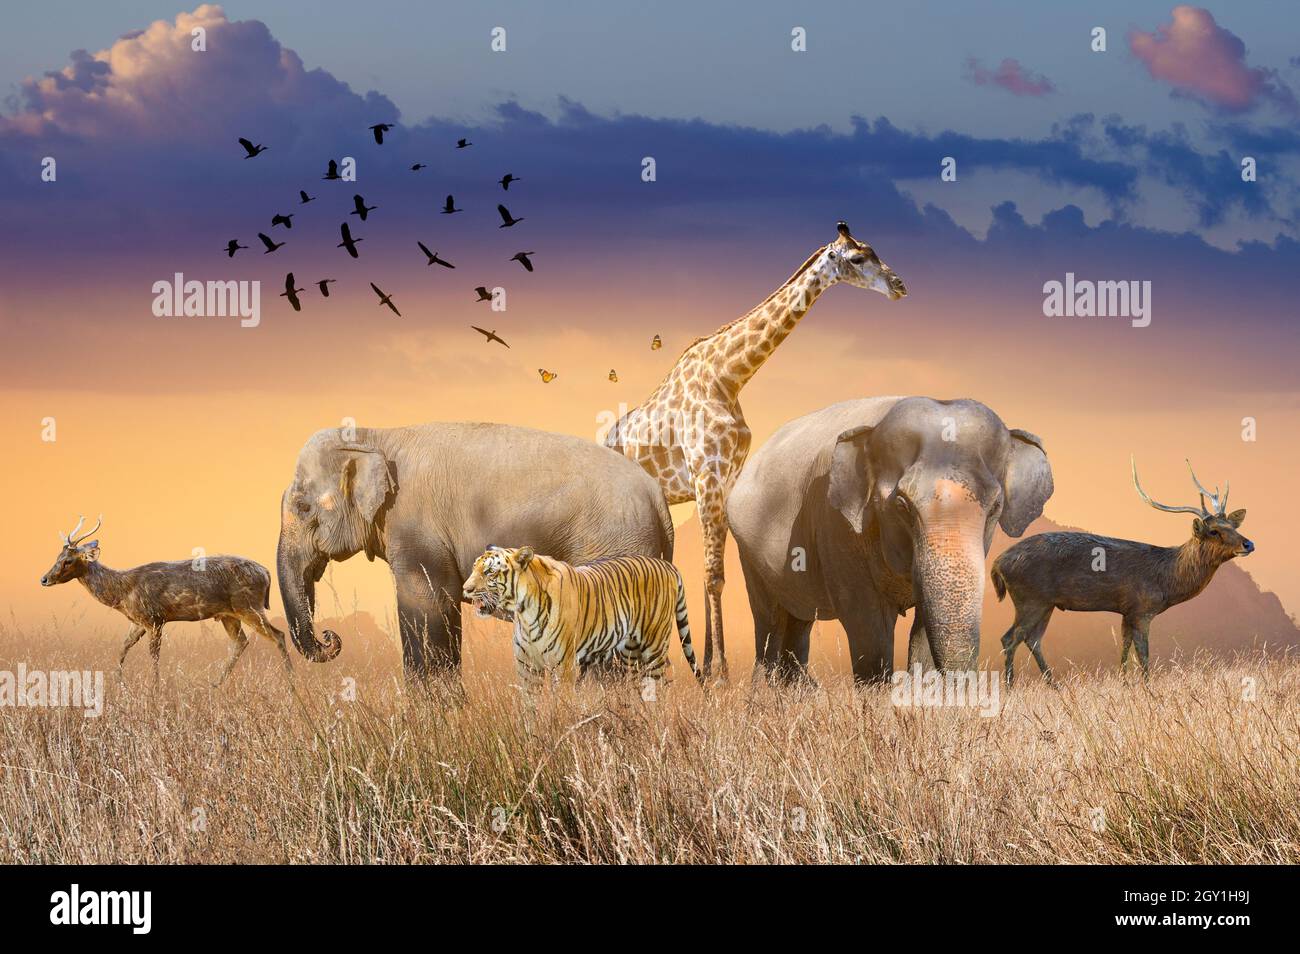 World Wildlife Day  Groups of wild beasts were gathered in large herds in the open field in the evening when the golden sun was shining. Stock Photo